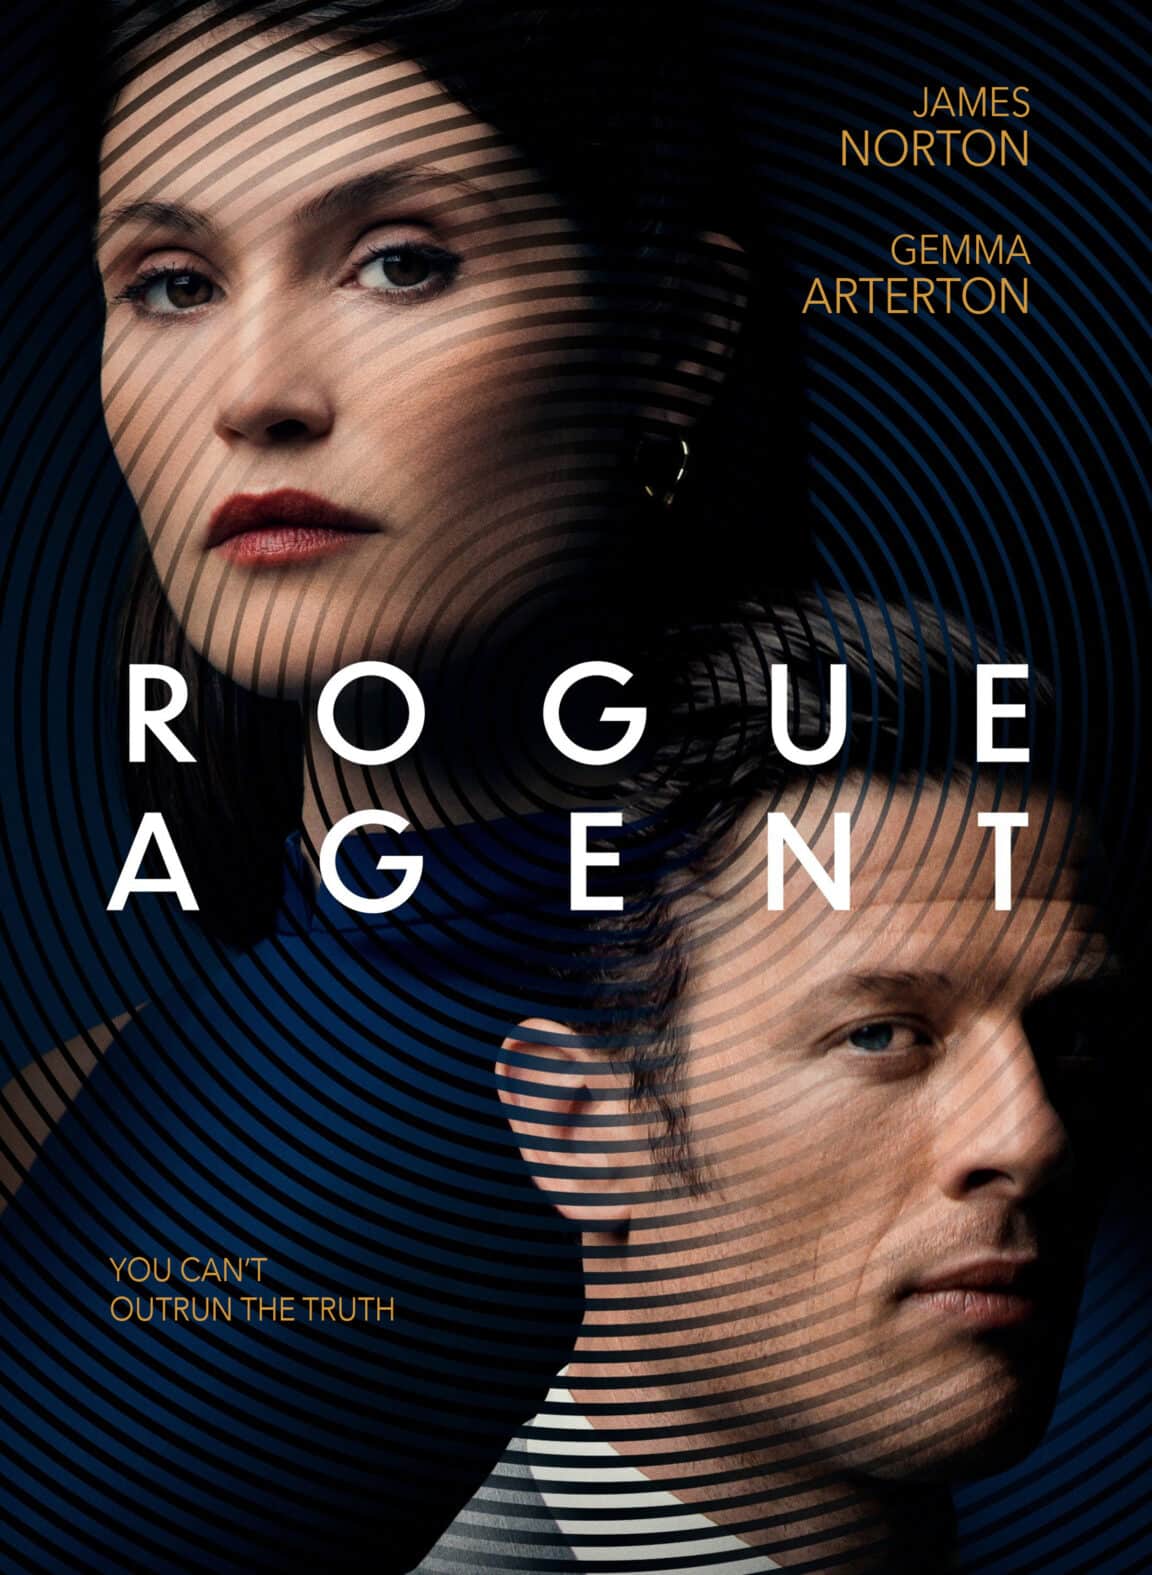 Rogue Agent – CINESKY PICTURES